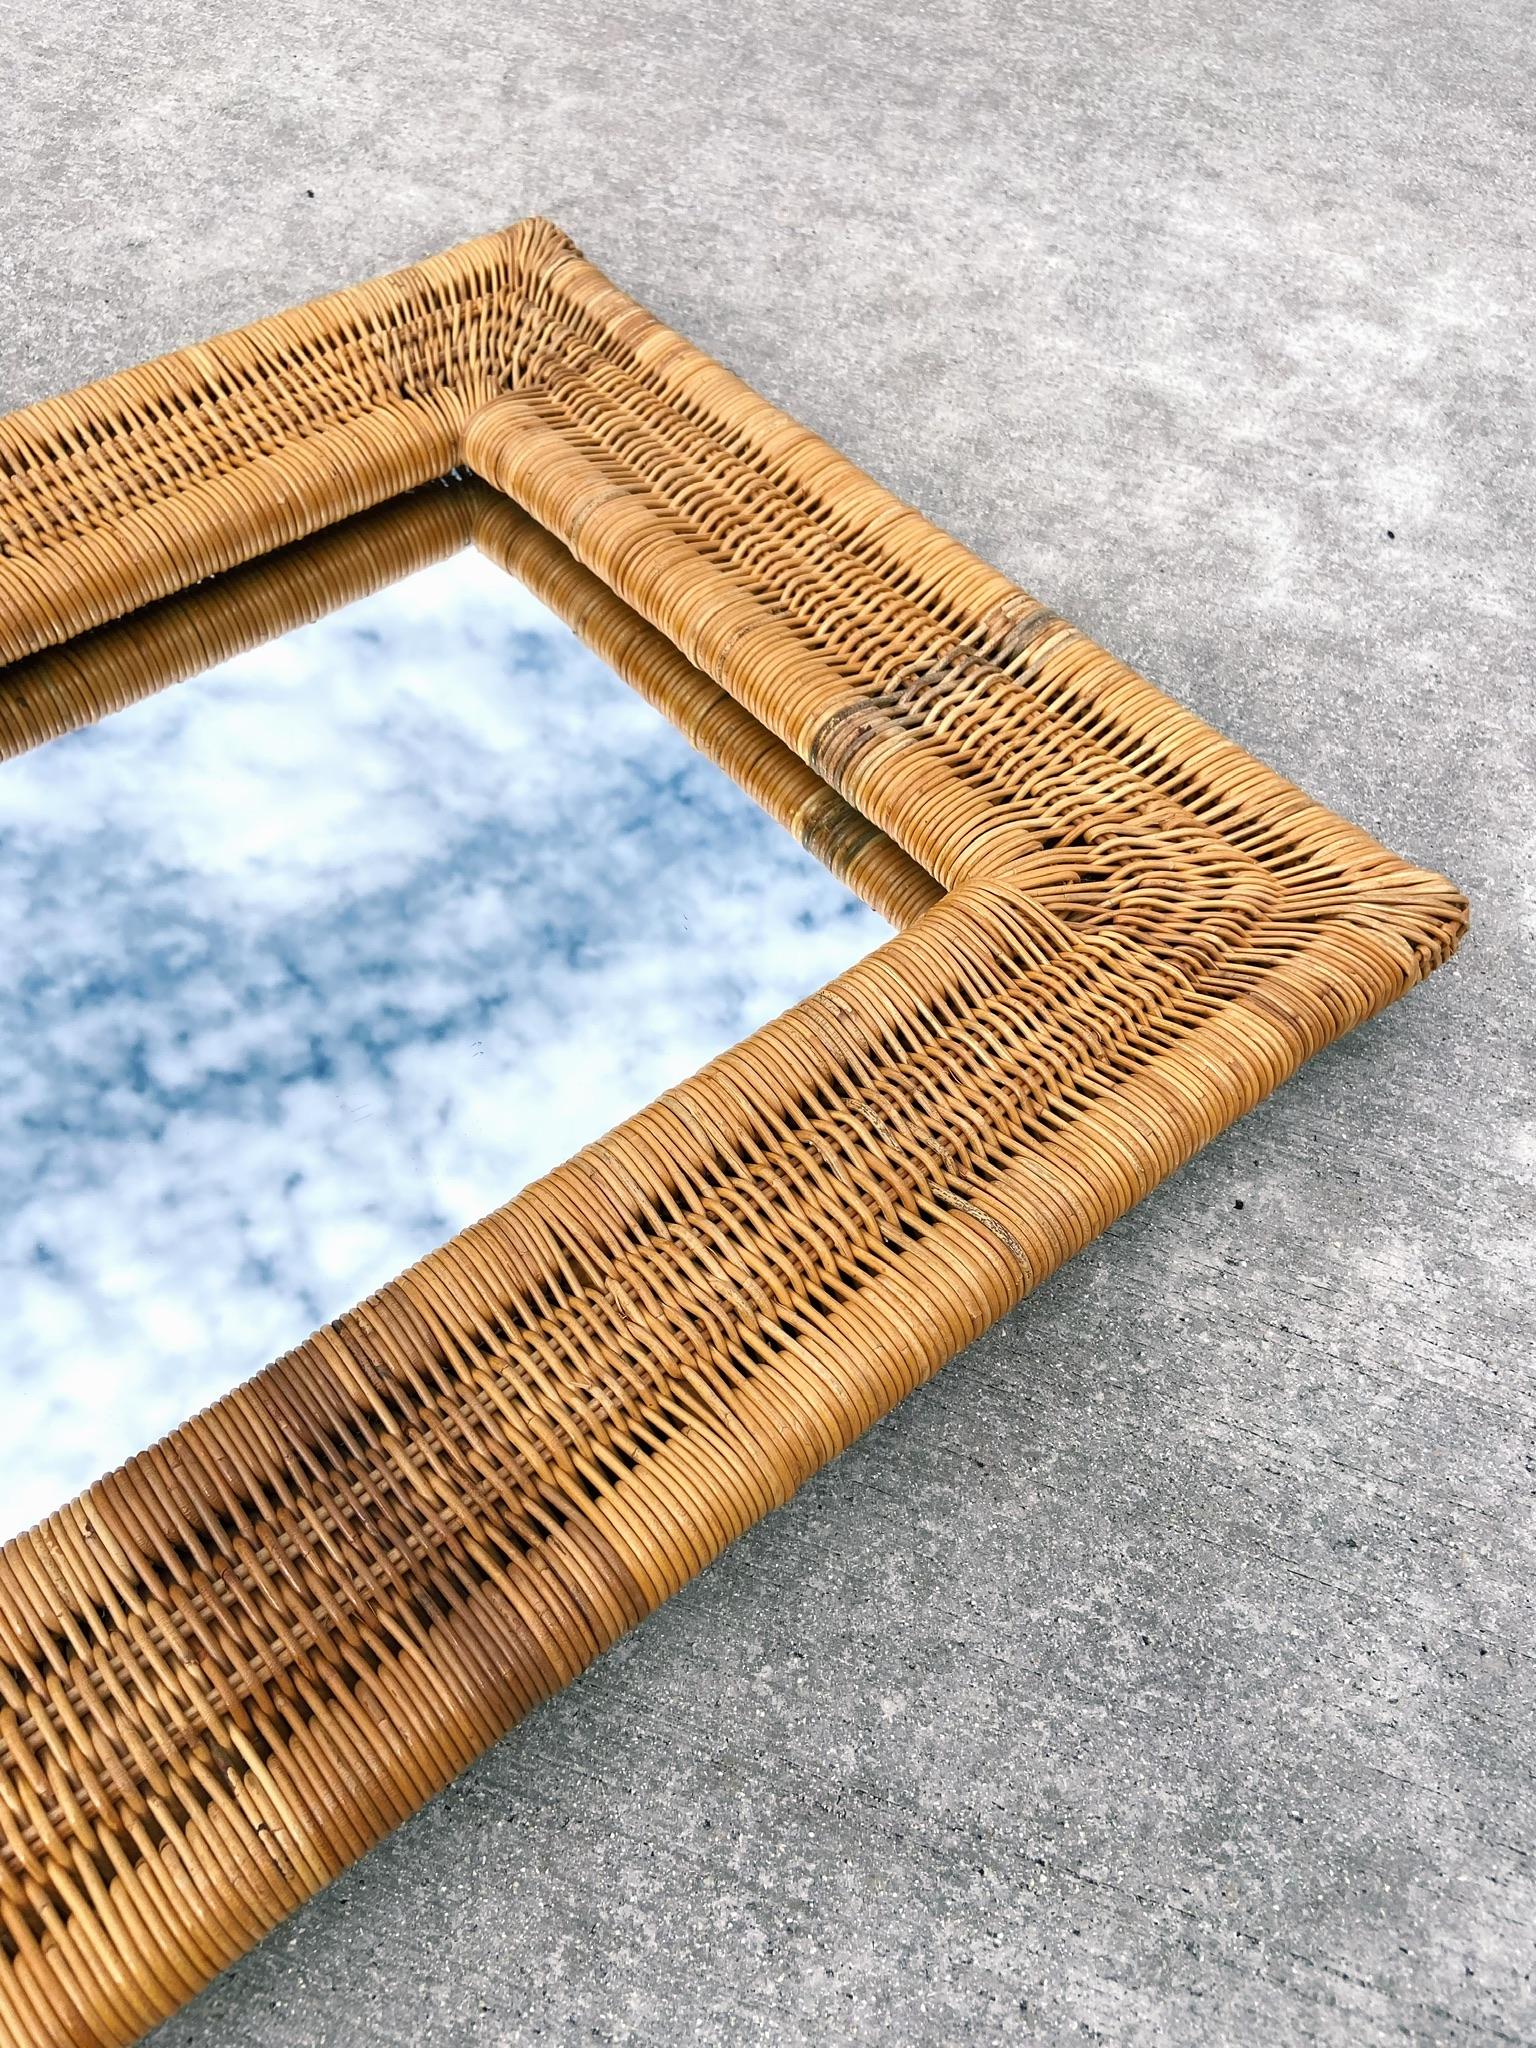 Amazing wicker woven mirror from the 1970’s with beautiful contrasting wicker throughout.